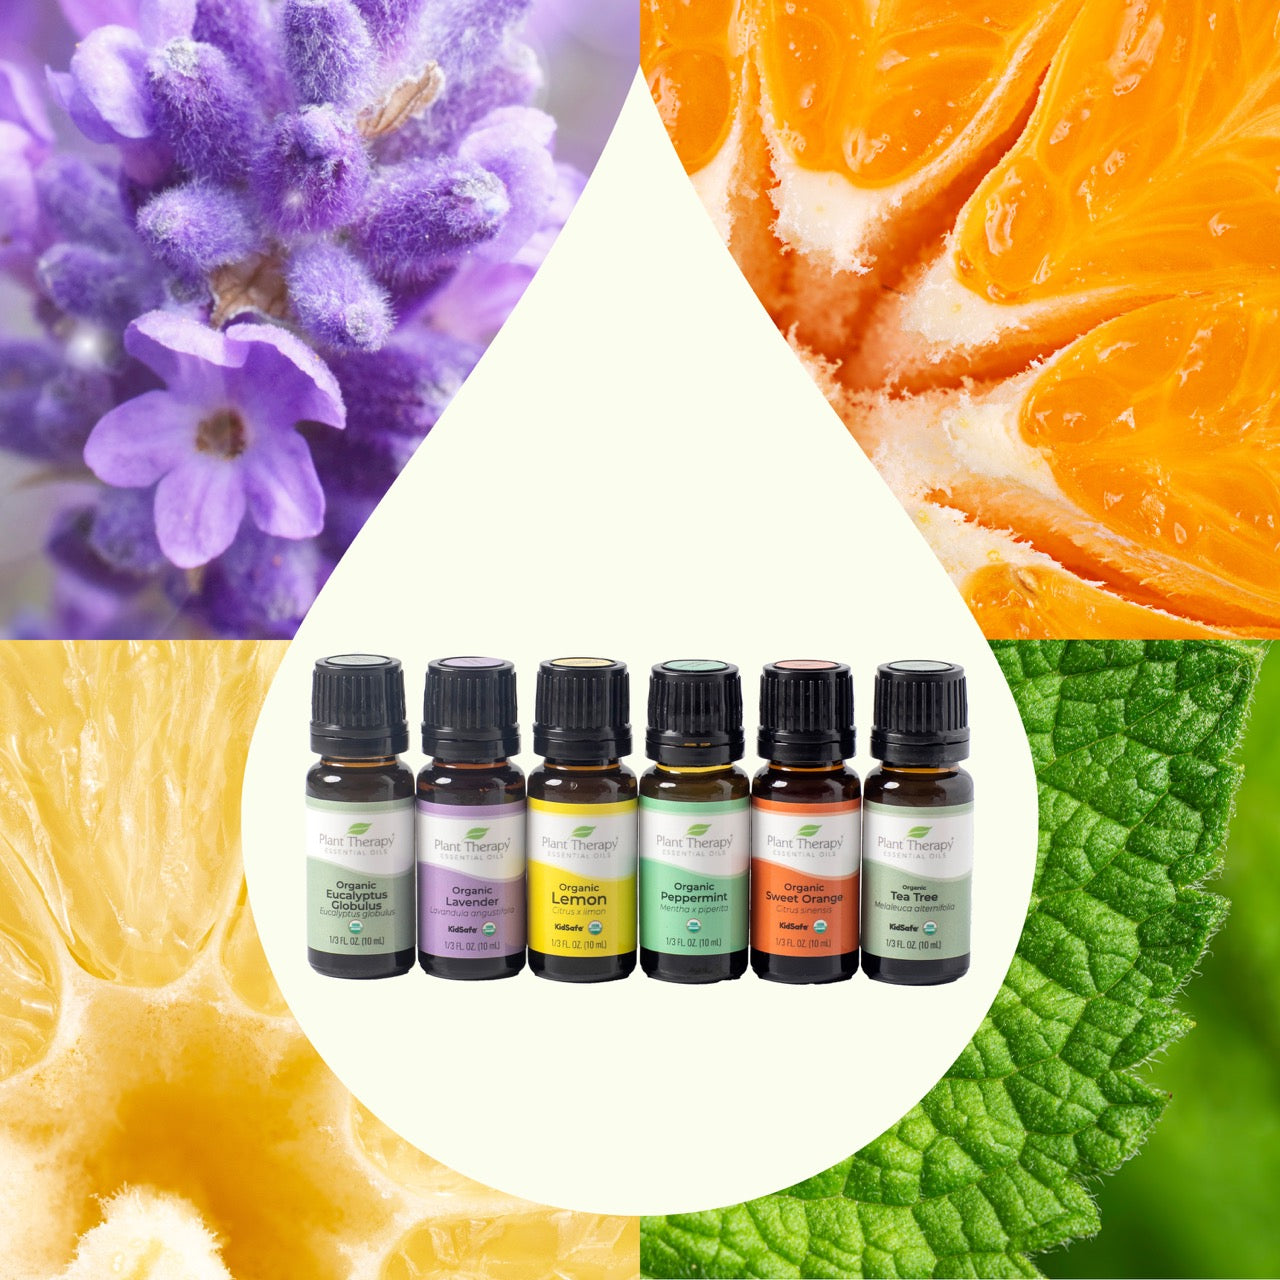 Top 6 Organic Singles Essential Oil Set with key ingredient images